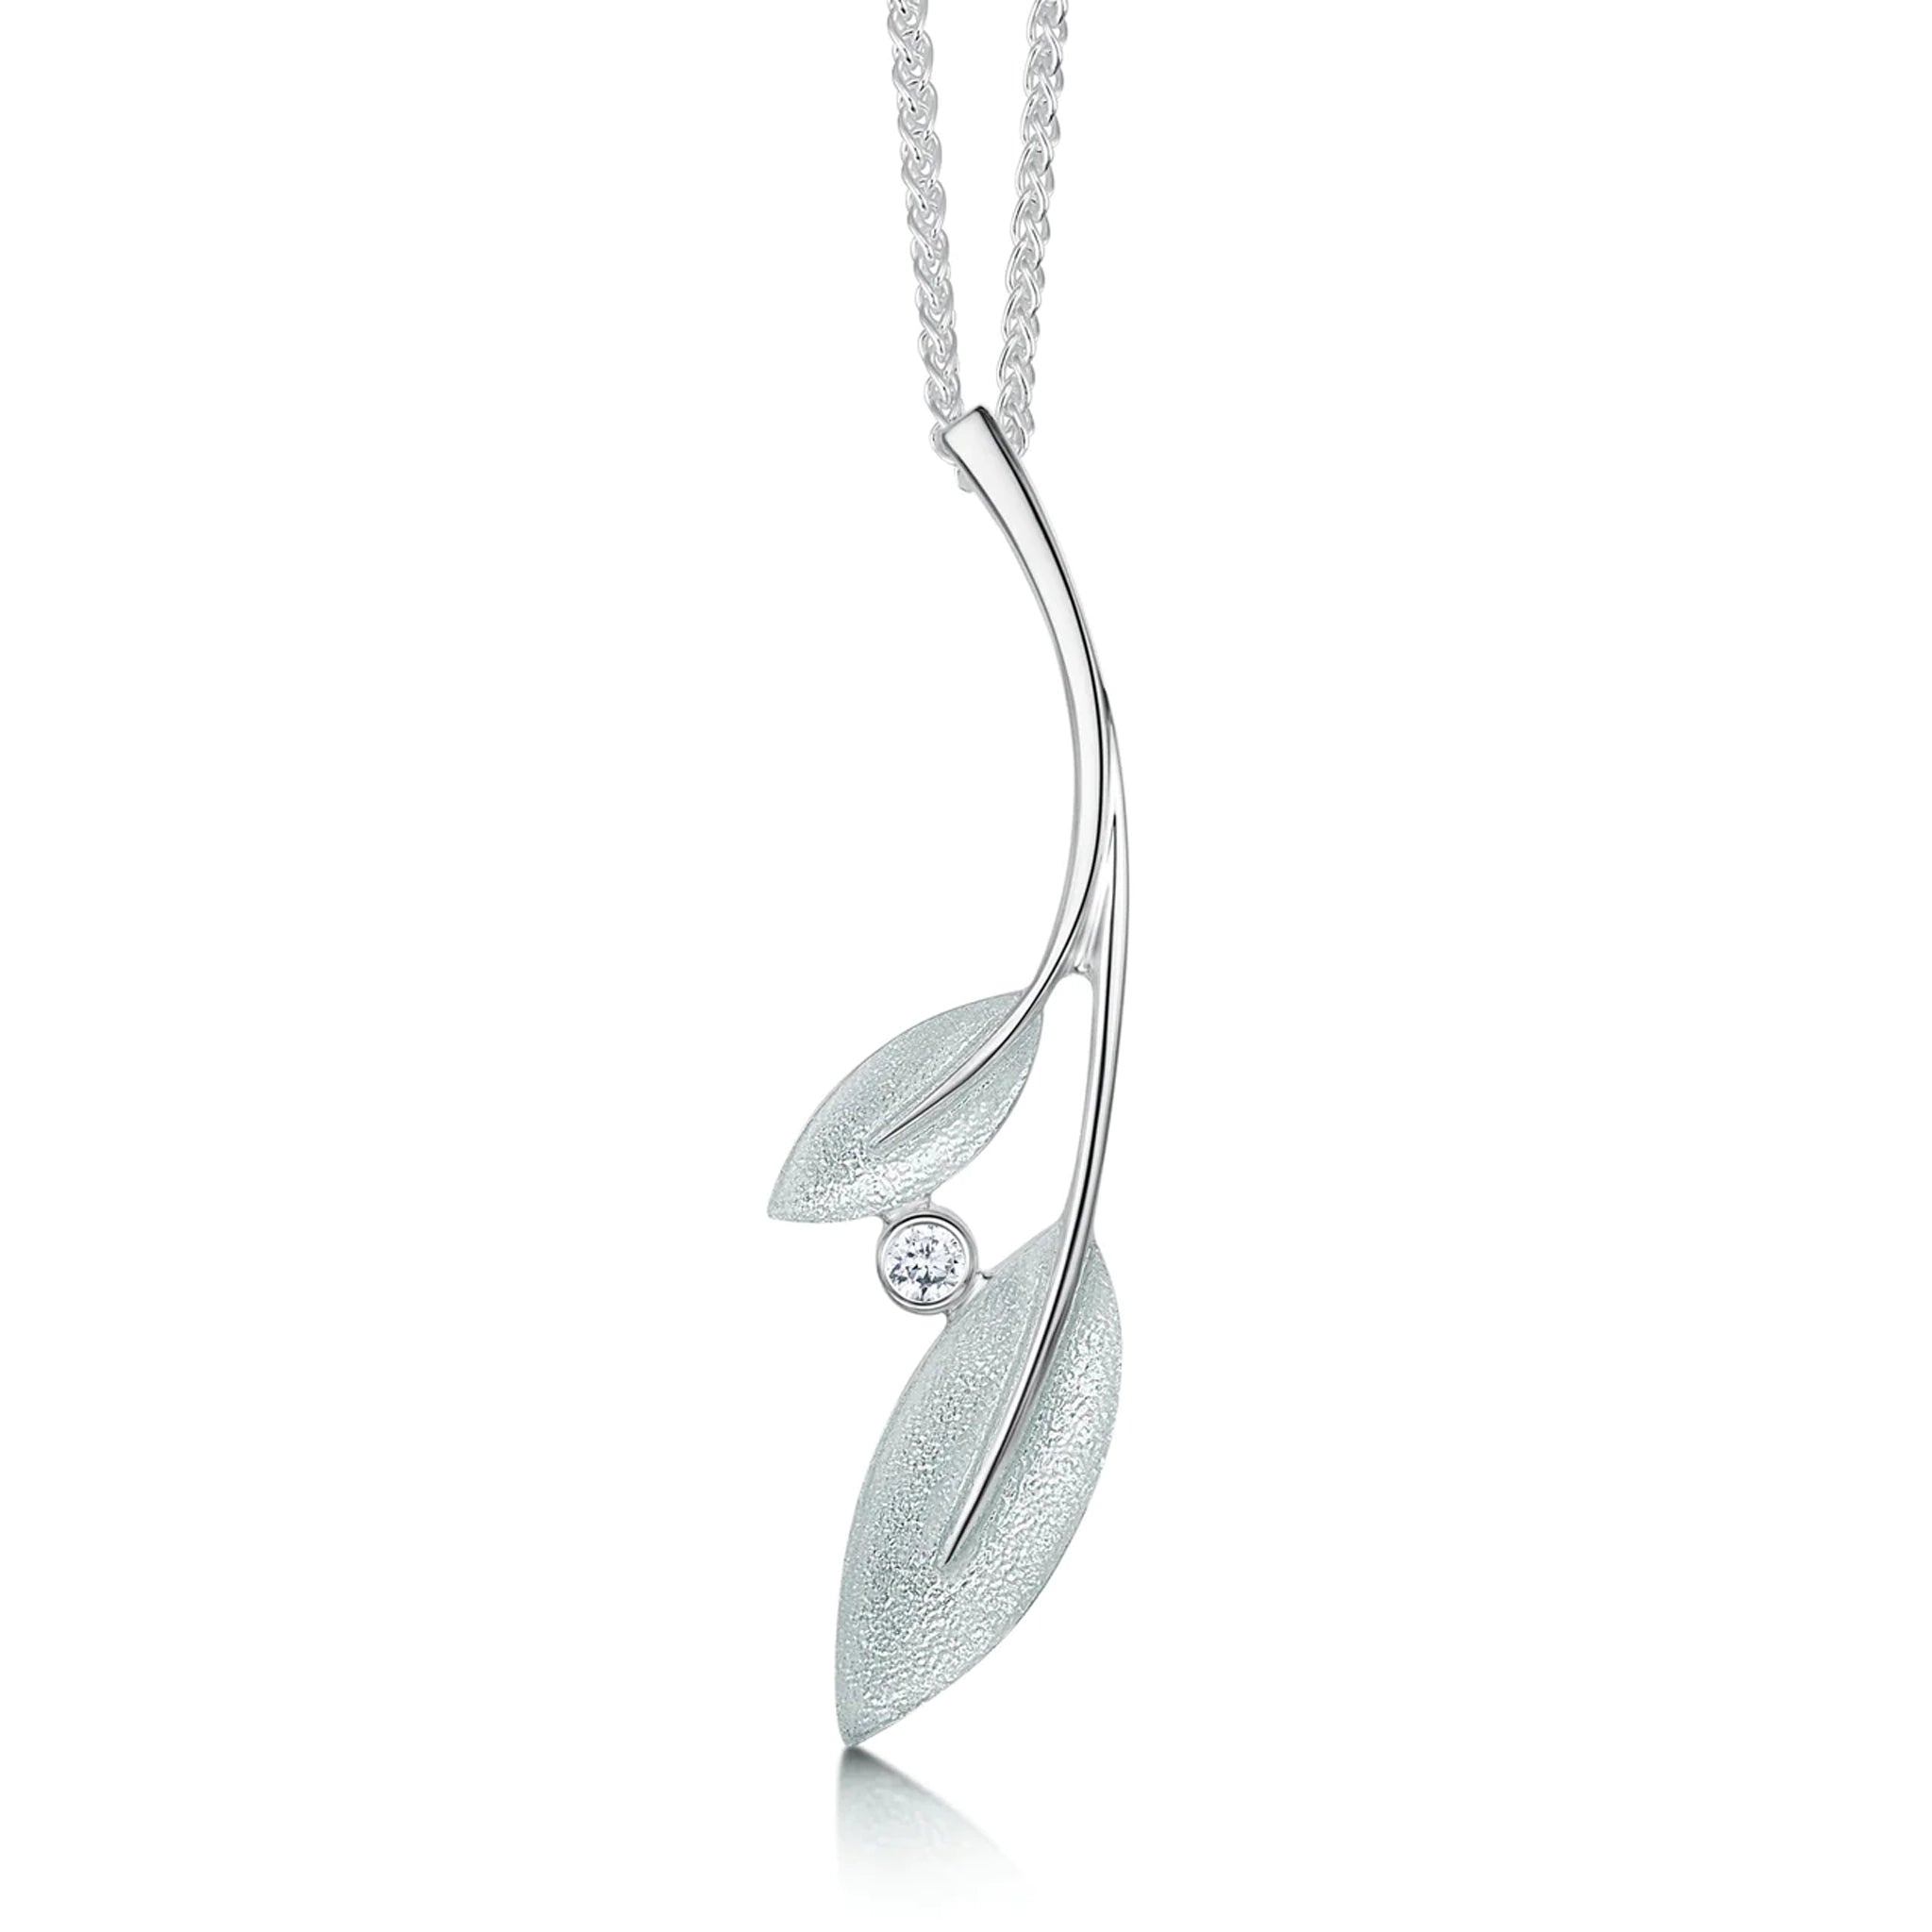 Silver pendant with double rowan tree leaves in a frosty white enamel and cubic zirconia, on a silver chain